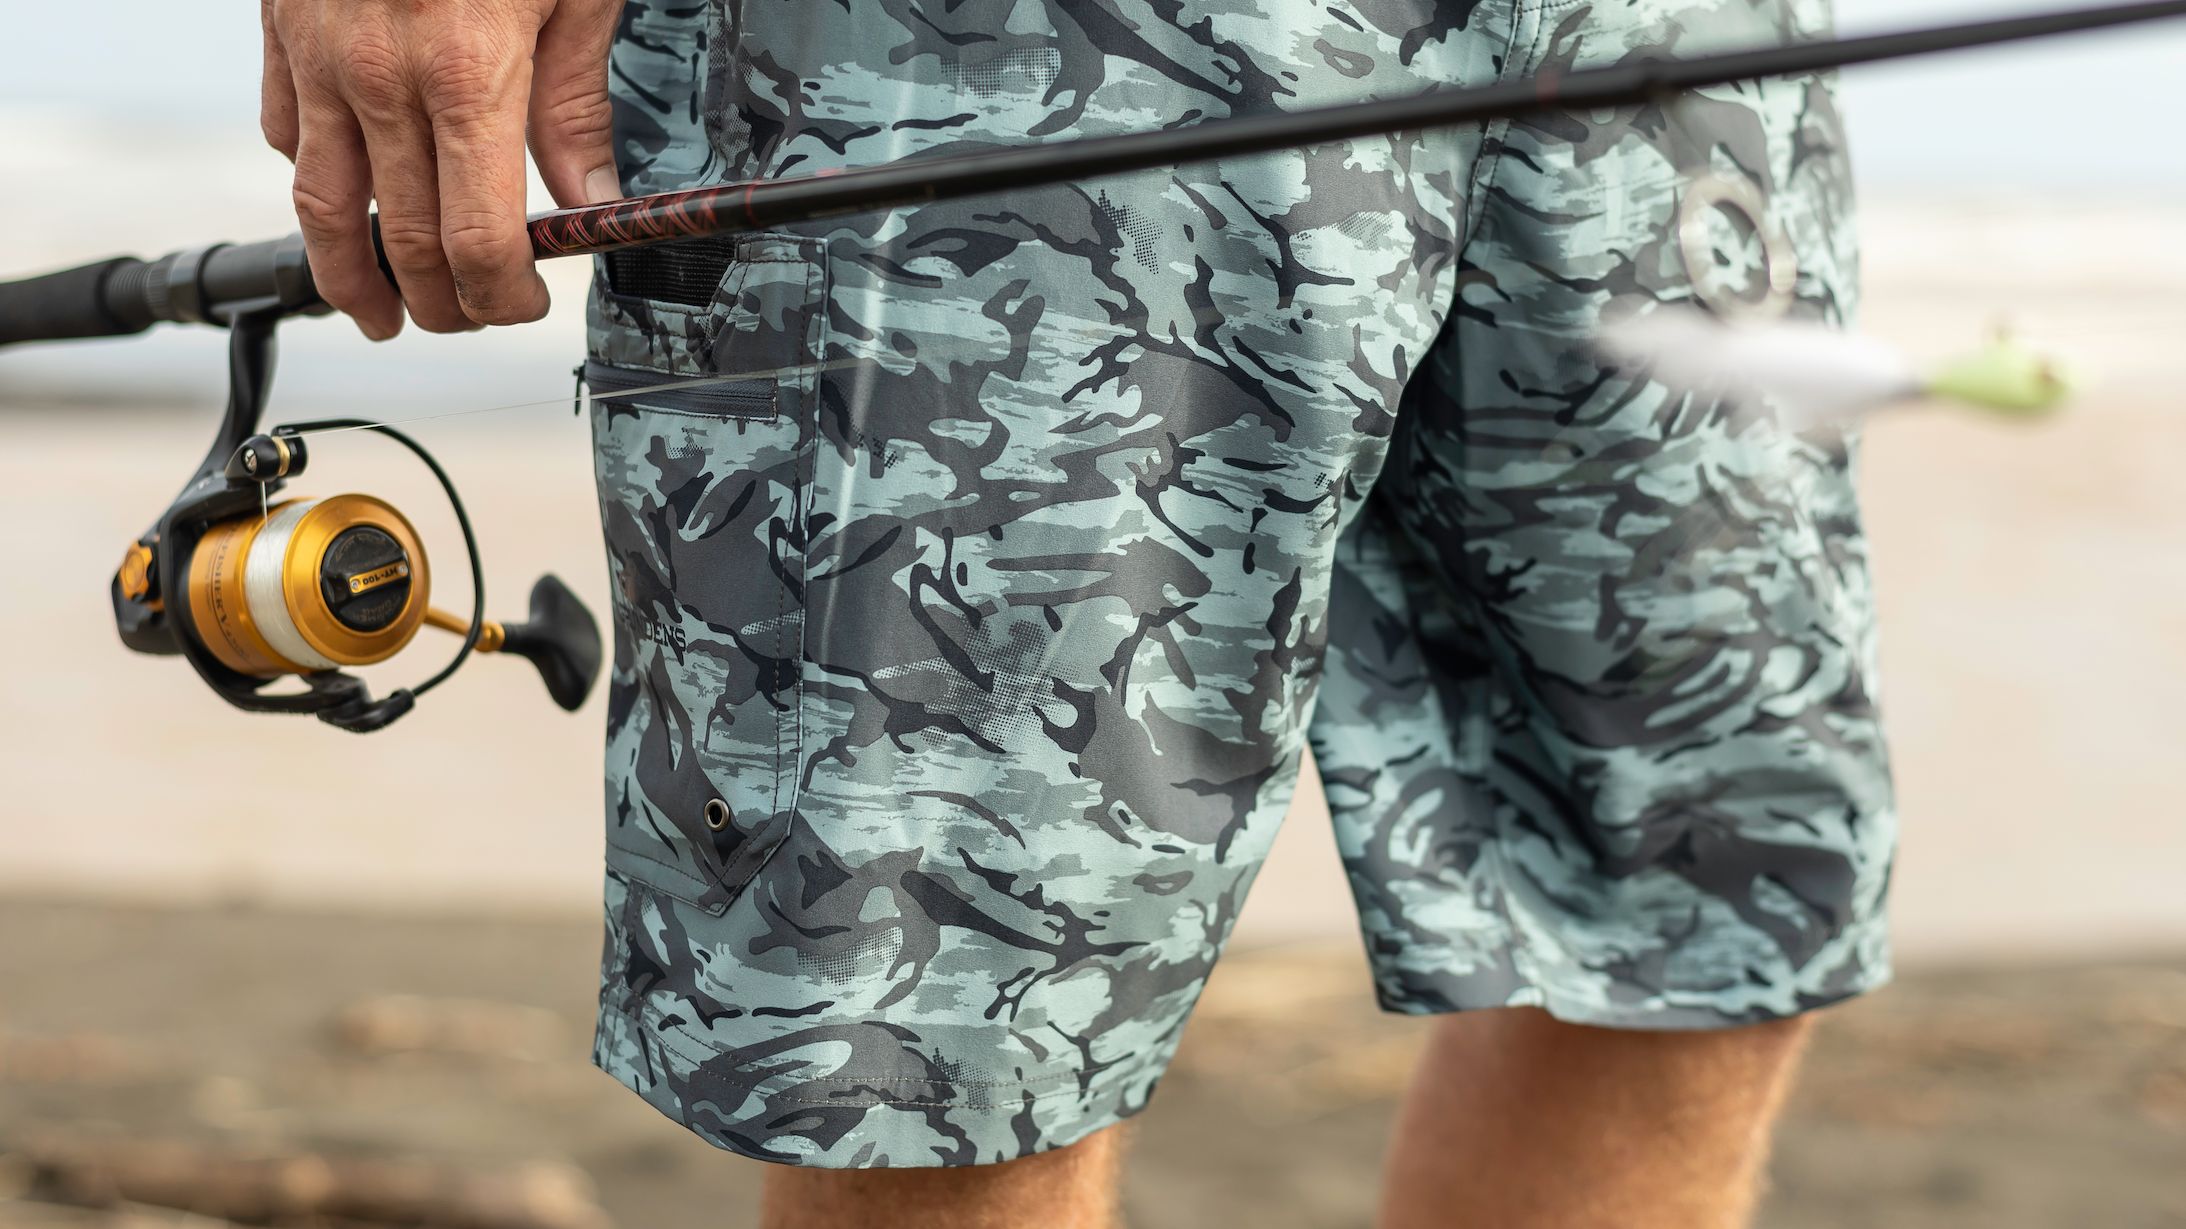 Grundéns on X: All new Fish Head Boardshorts! Built for versatility, these  boardshorts offer a UPF 30 rating, a built-in pliers holster, several  pockets, and plenty of stretch for mobility — perfect